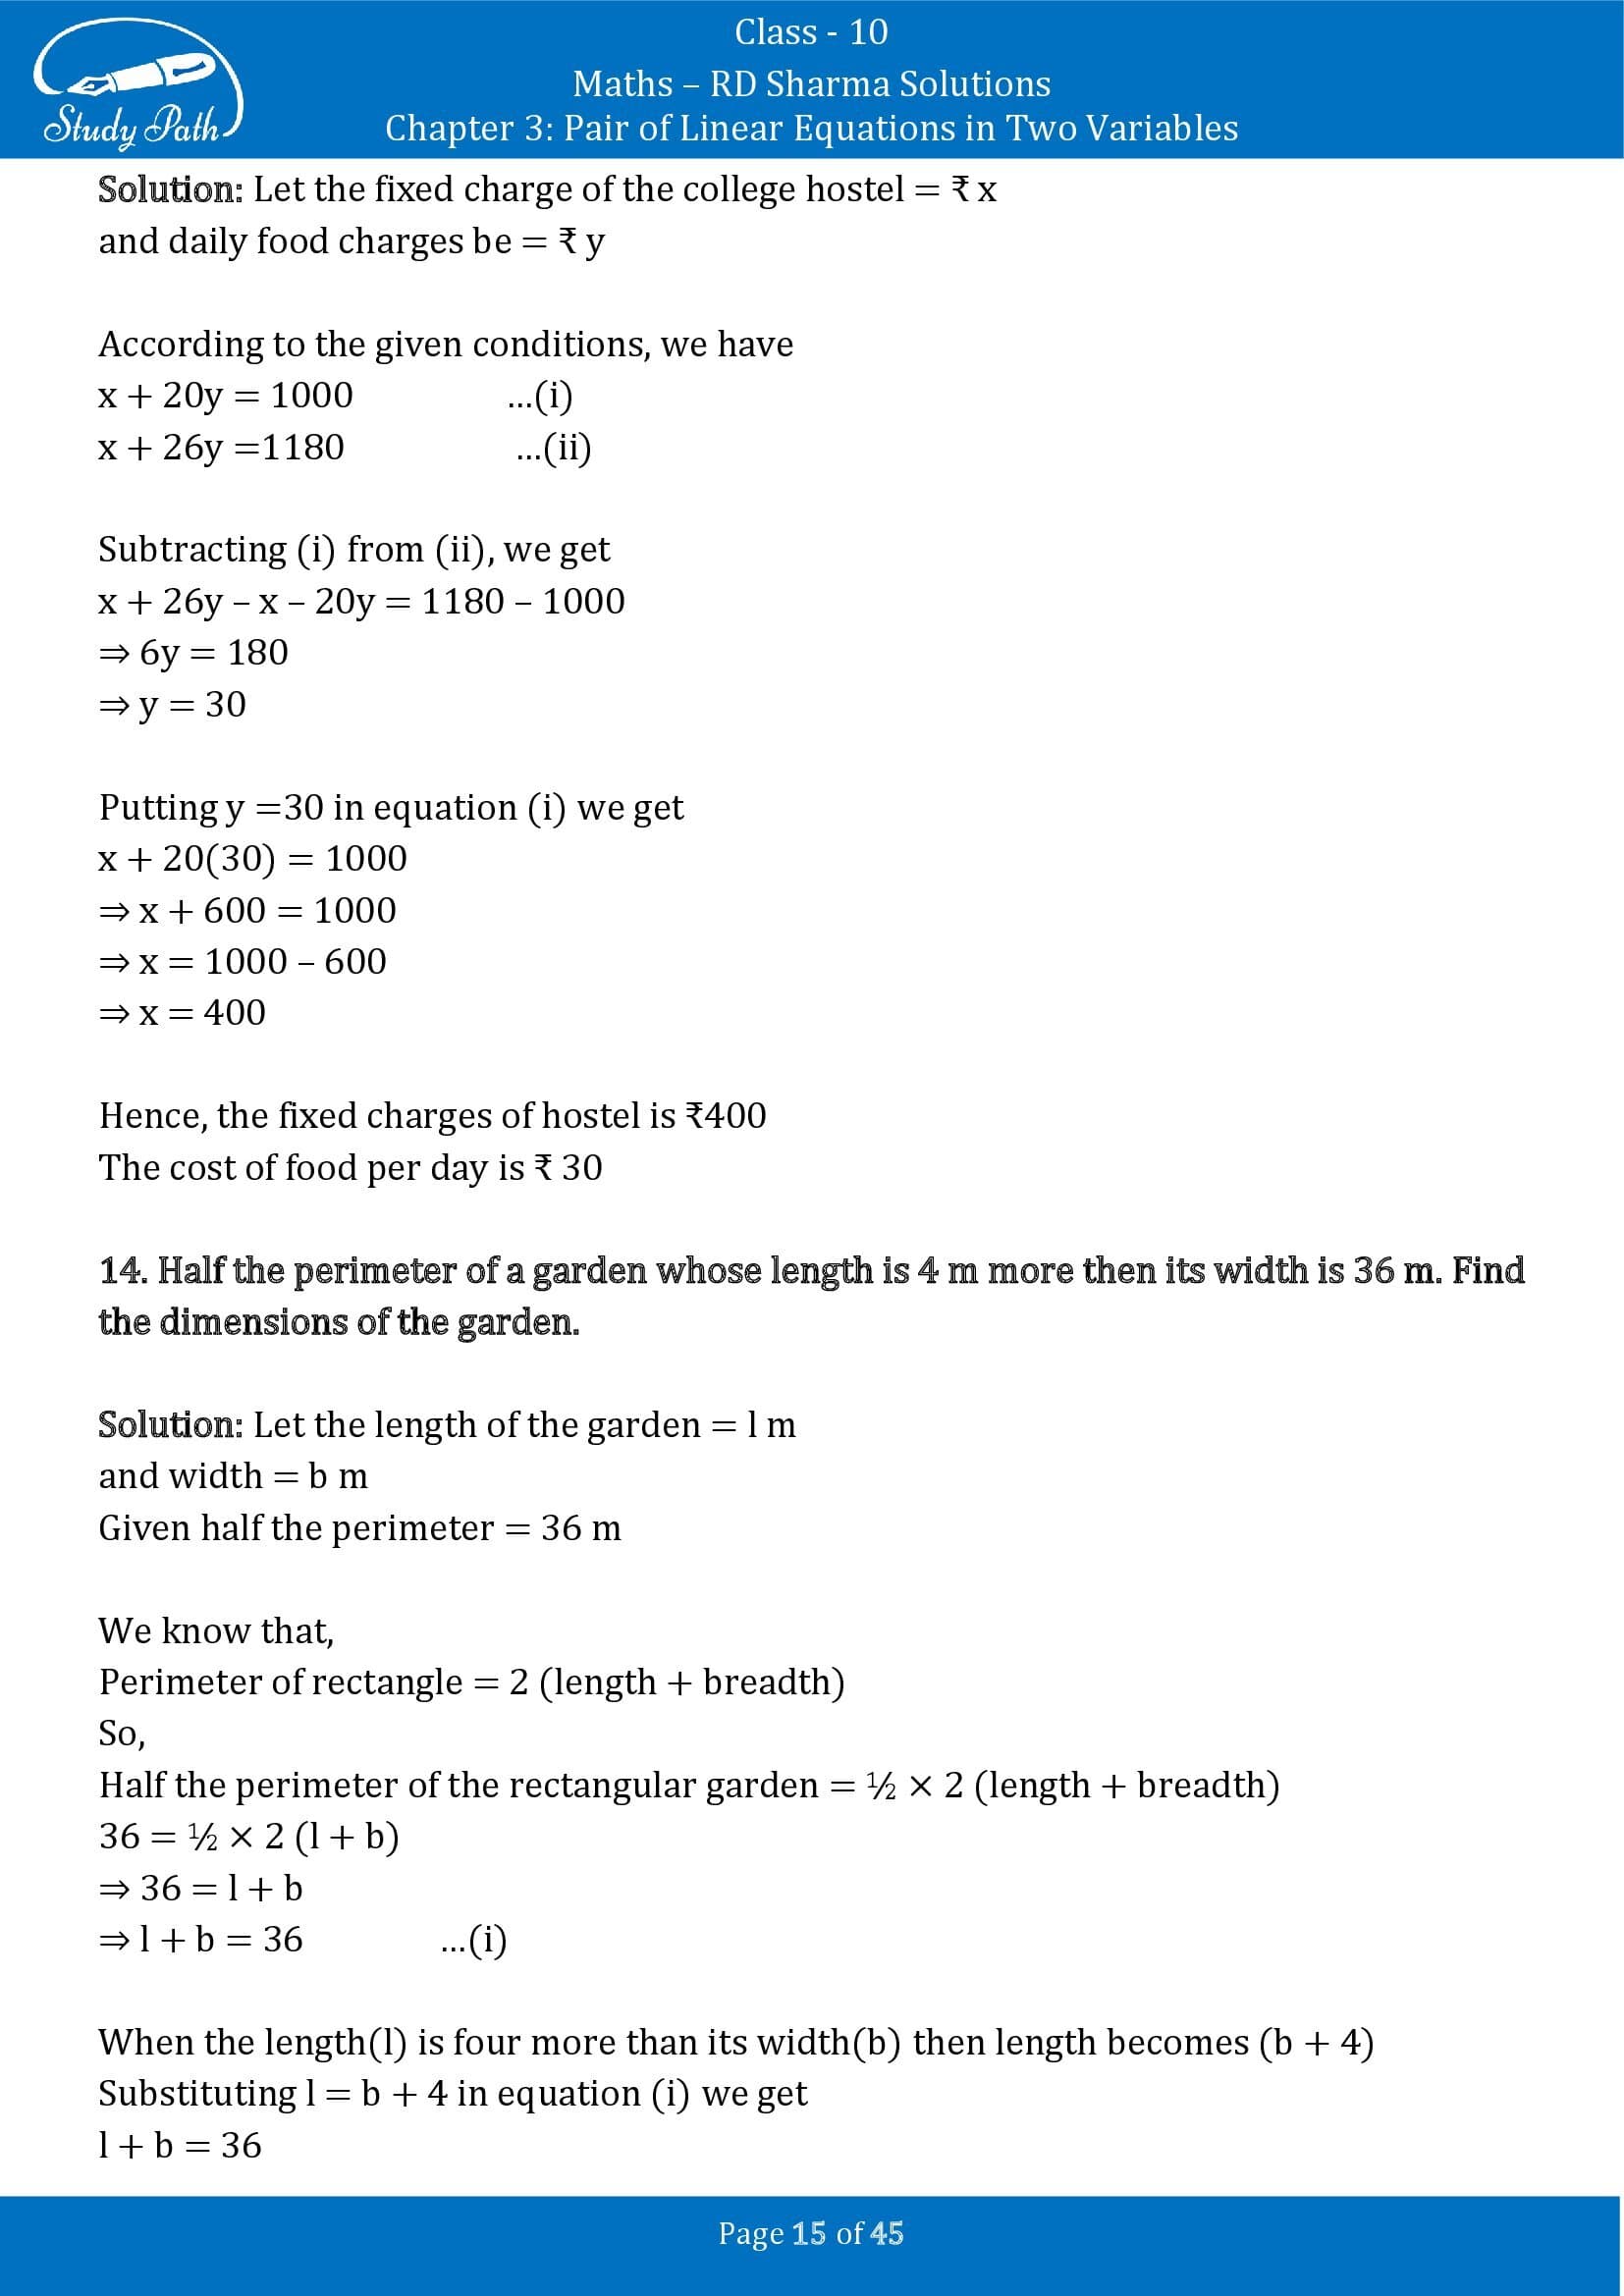 RD Sharma Solutions Class 10 Chapter 3 Pair of Linear Equations in Two Variables Exercise 3.11 00015